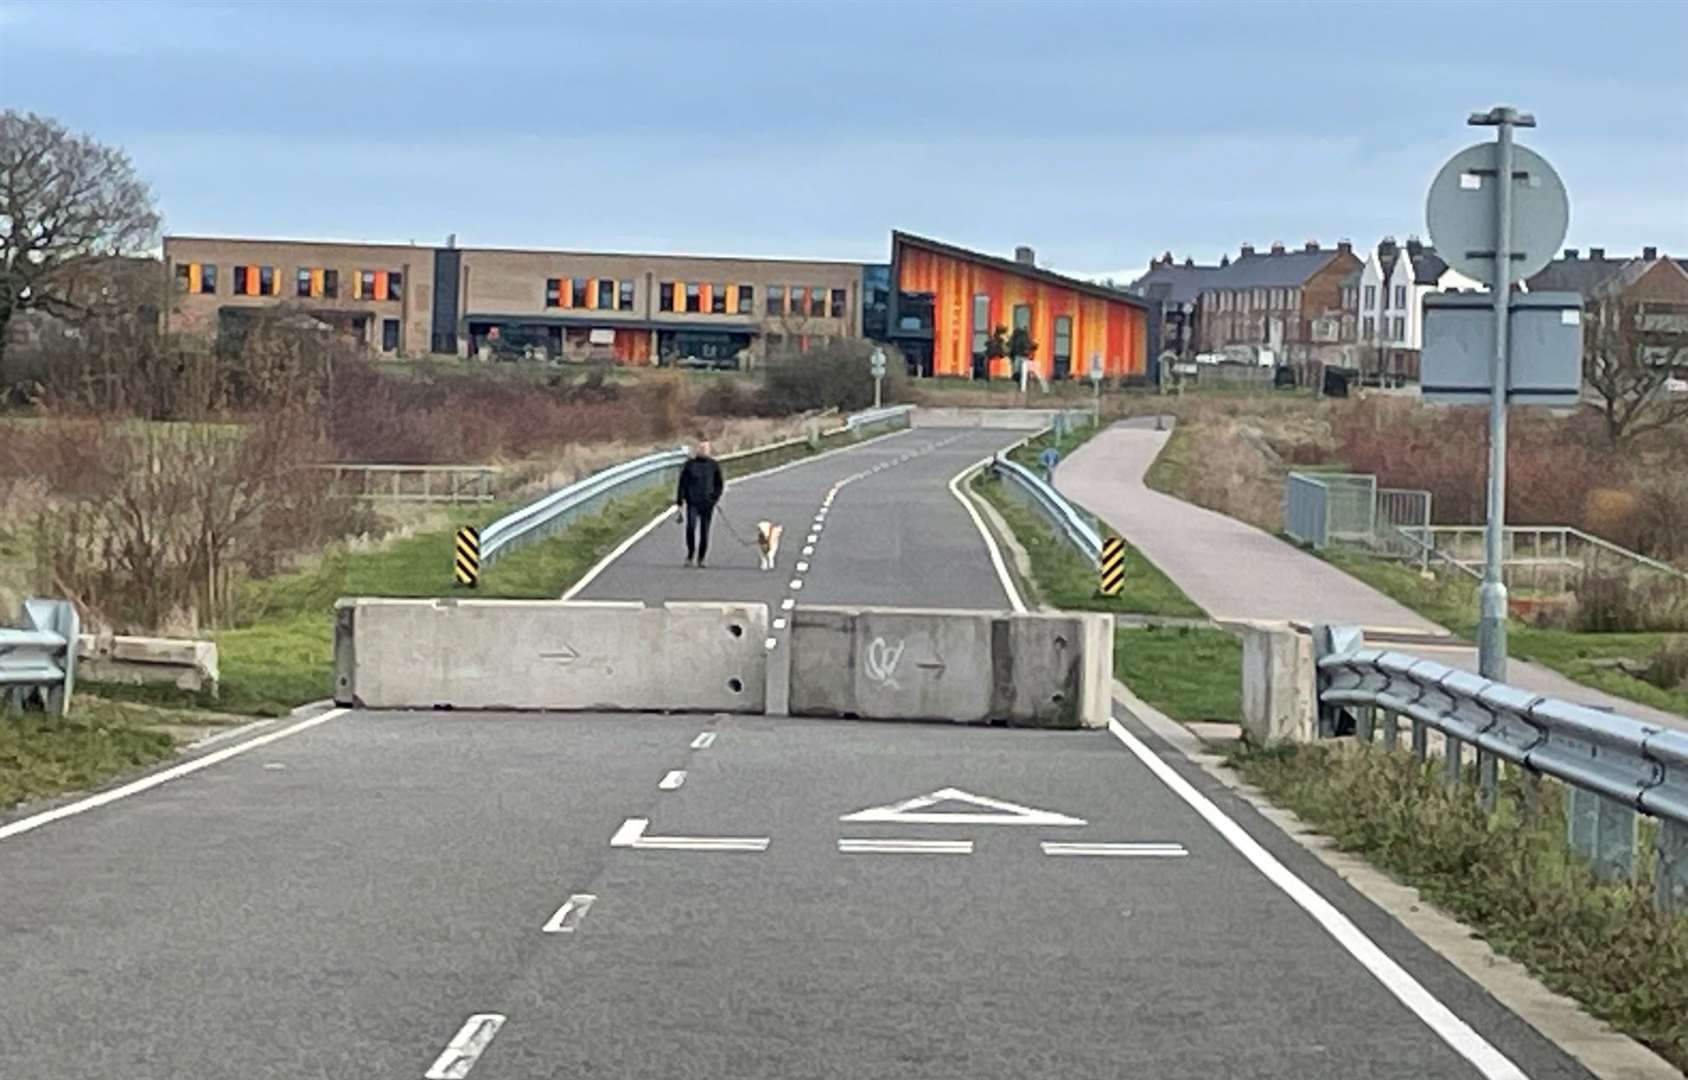 Avocet Way, which connects the Bridgefield and Finberry estates in Ashford, is closed to traffic. Once opened it will be a bus-only route